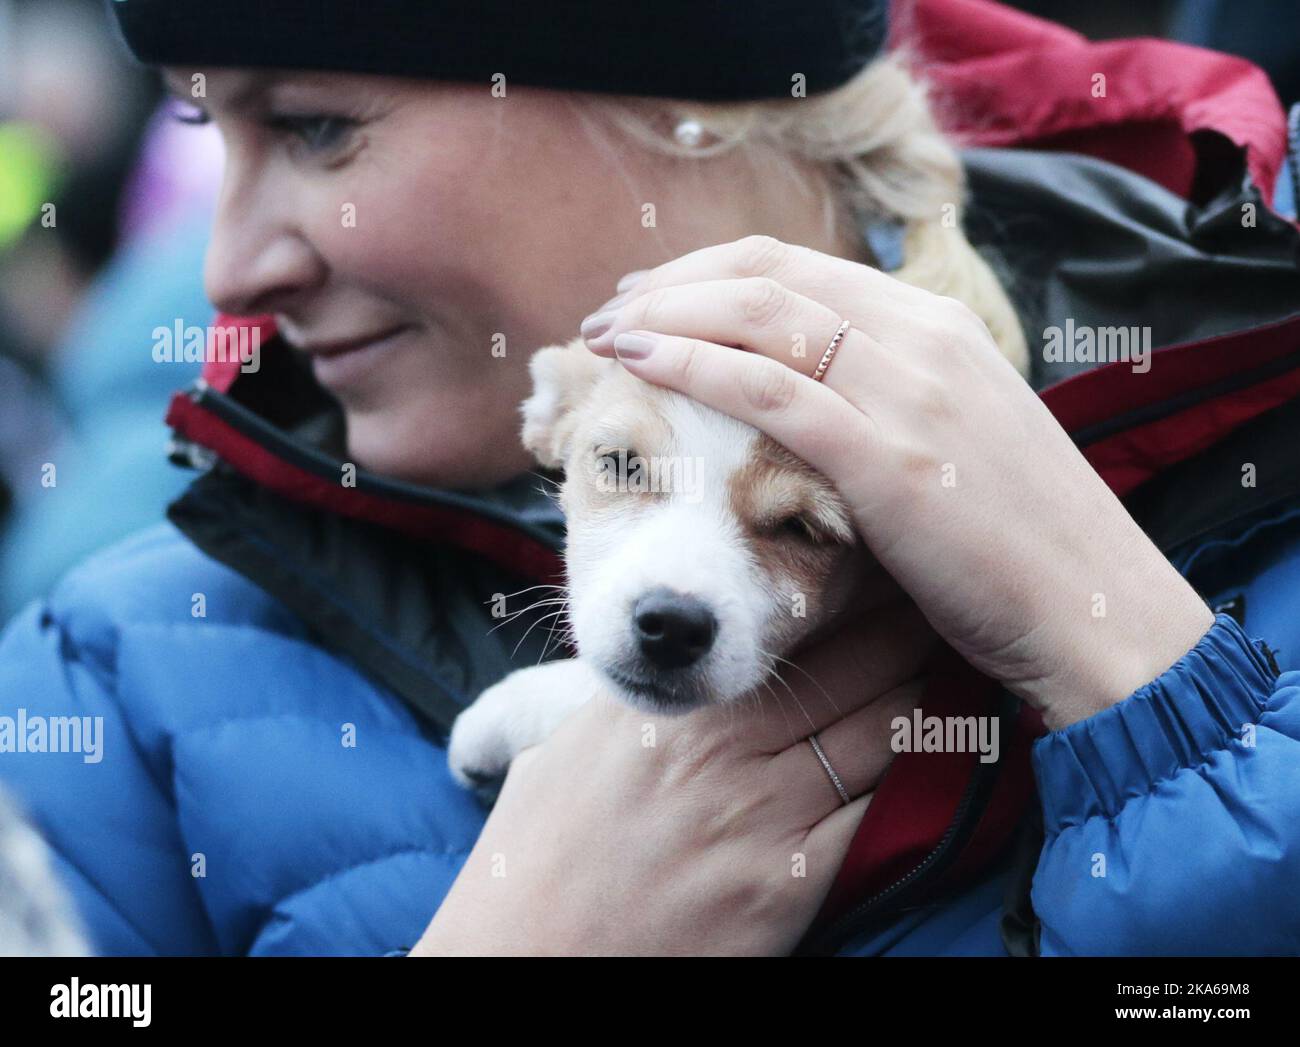 Oslo, Norway 20150113. The Royal Crown Prince Couple visit Toyenparken in Oslo on Tuesday for the opening of the Outdoor Recreation Year 2015 (Friluftlivets aar). 1600 children an youth attended the opening. Here puppy 'Toeffen' owned by mayor Fabian Stang receives the royal touch of the Crown Princess Mette-Marit. Photo: Lise Aaserud / NTB scanpix  Stock Photo